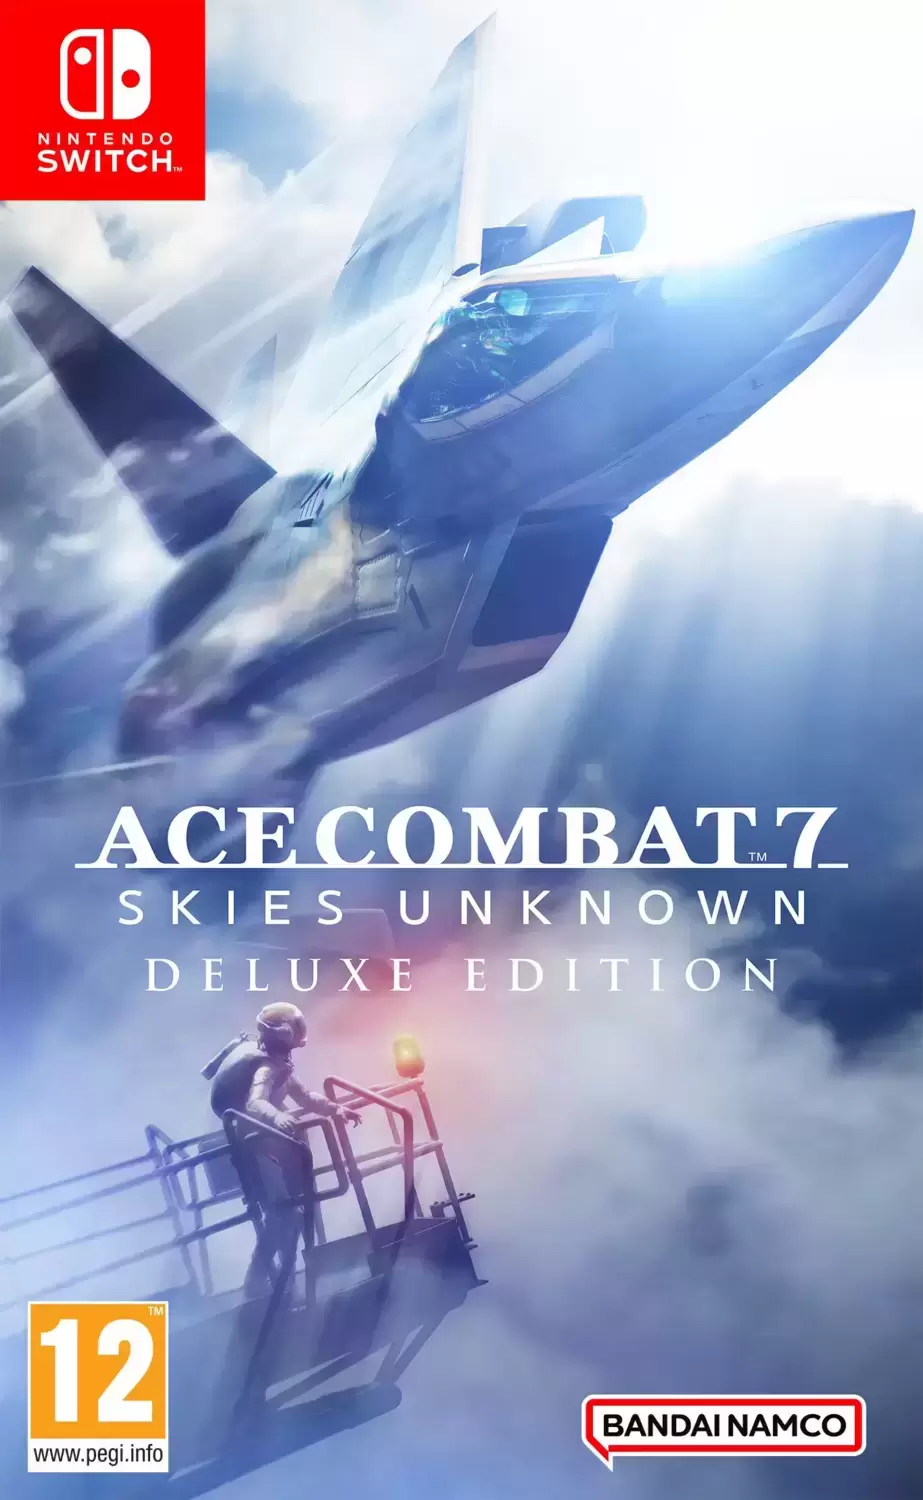 Jeux Nintendo Switch - Ace Combat 7 Skies Unknown - Deluxe Edition